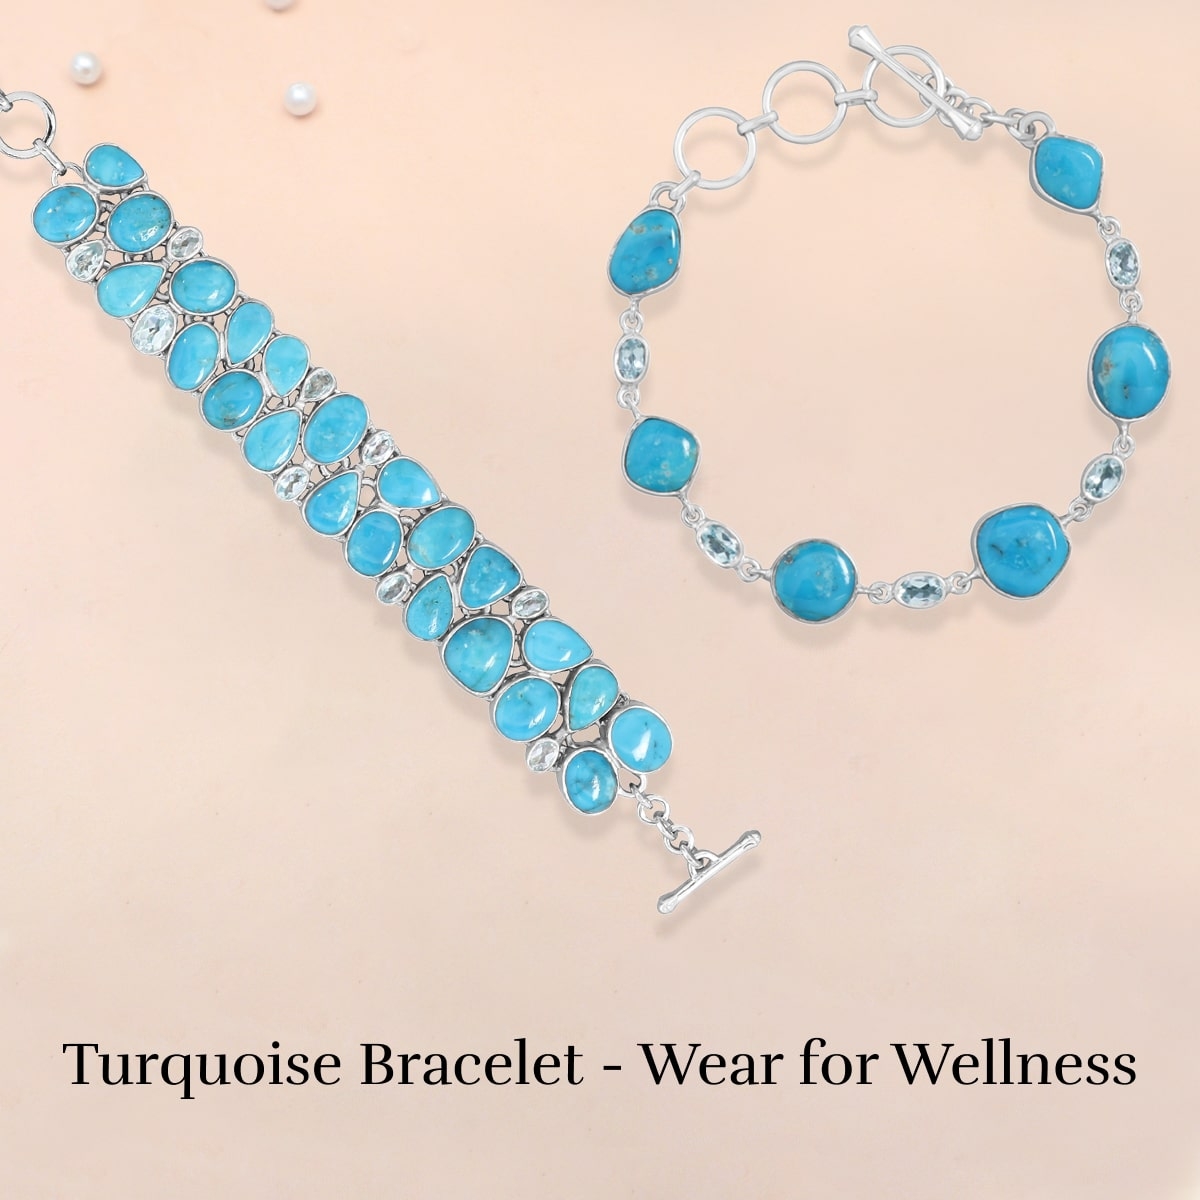 Benefits of wearing with Turquoise Bracelet